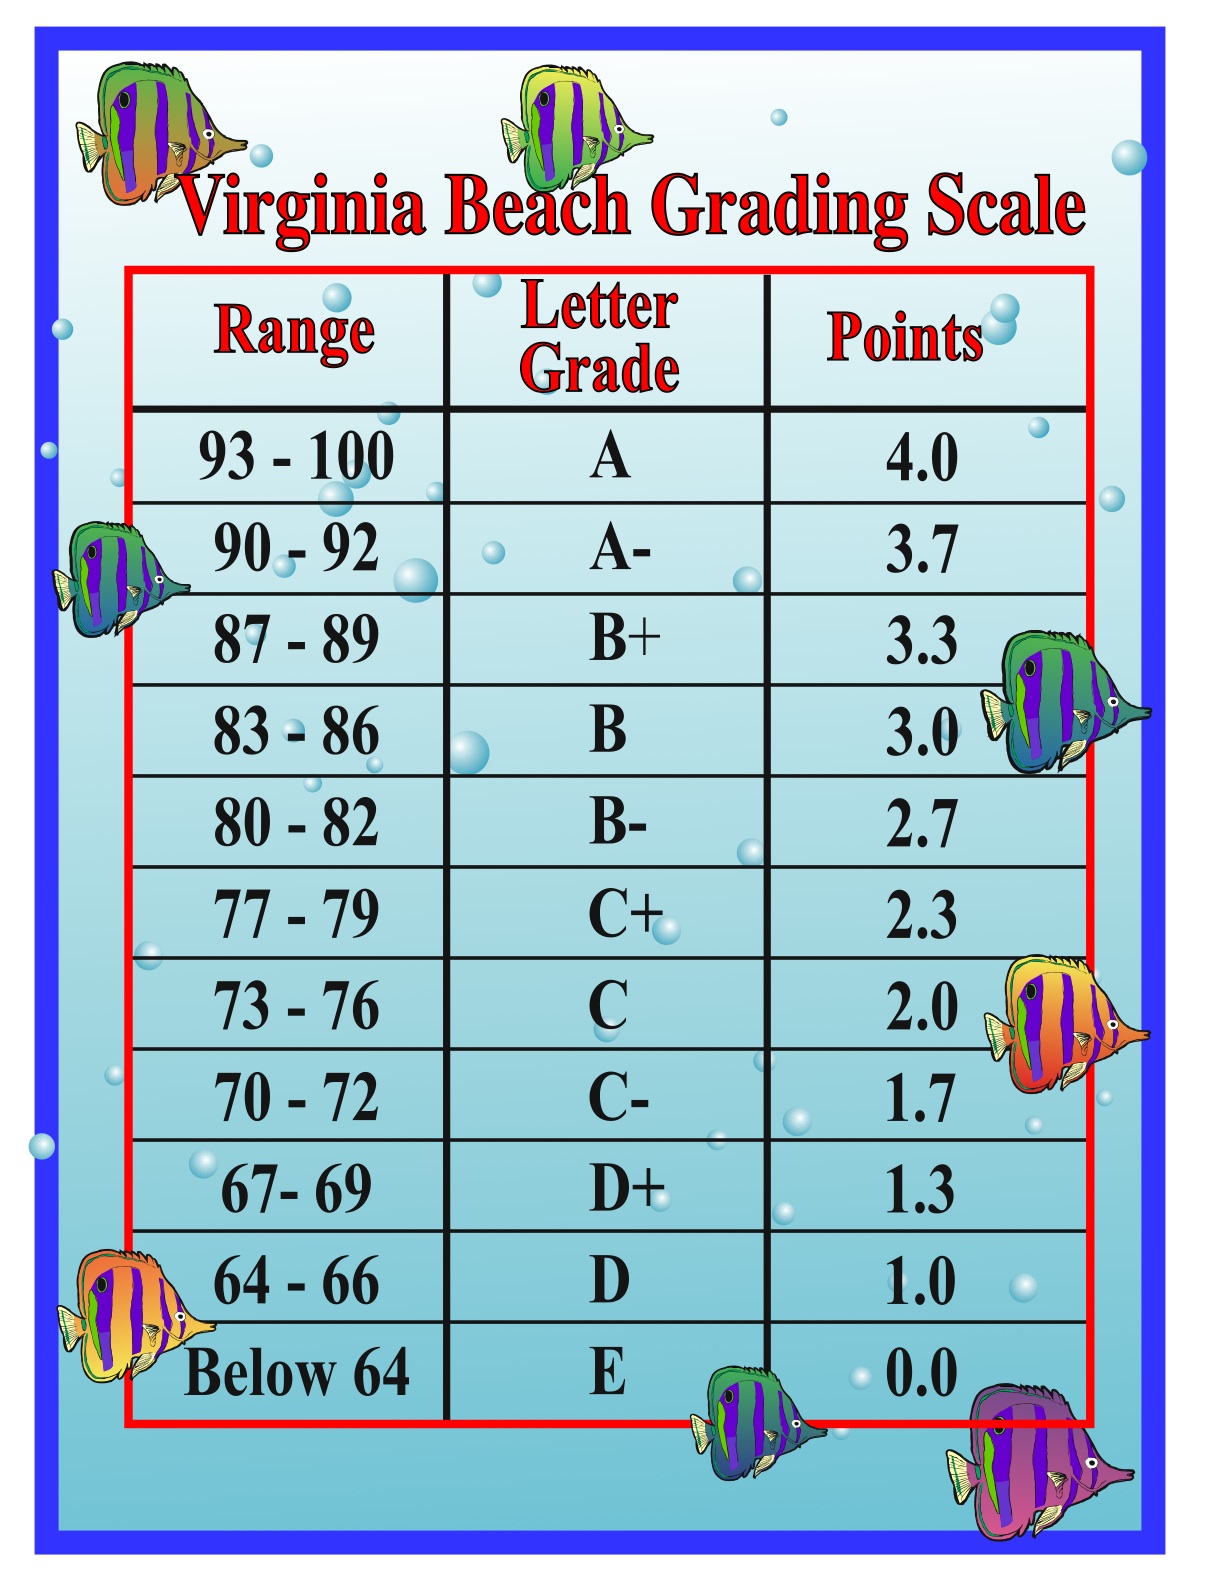 College Letter Grade Scale levelings